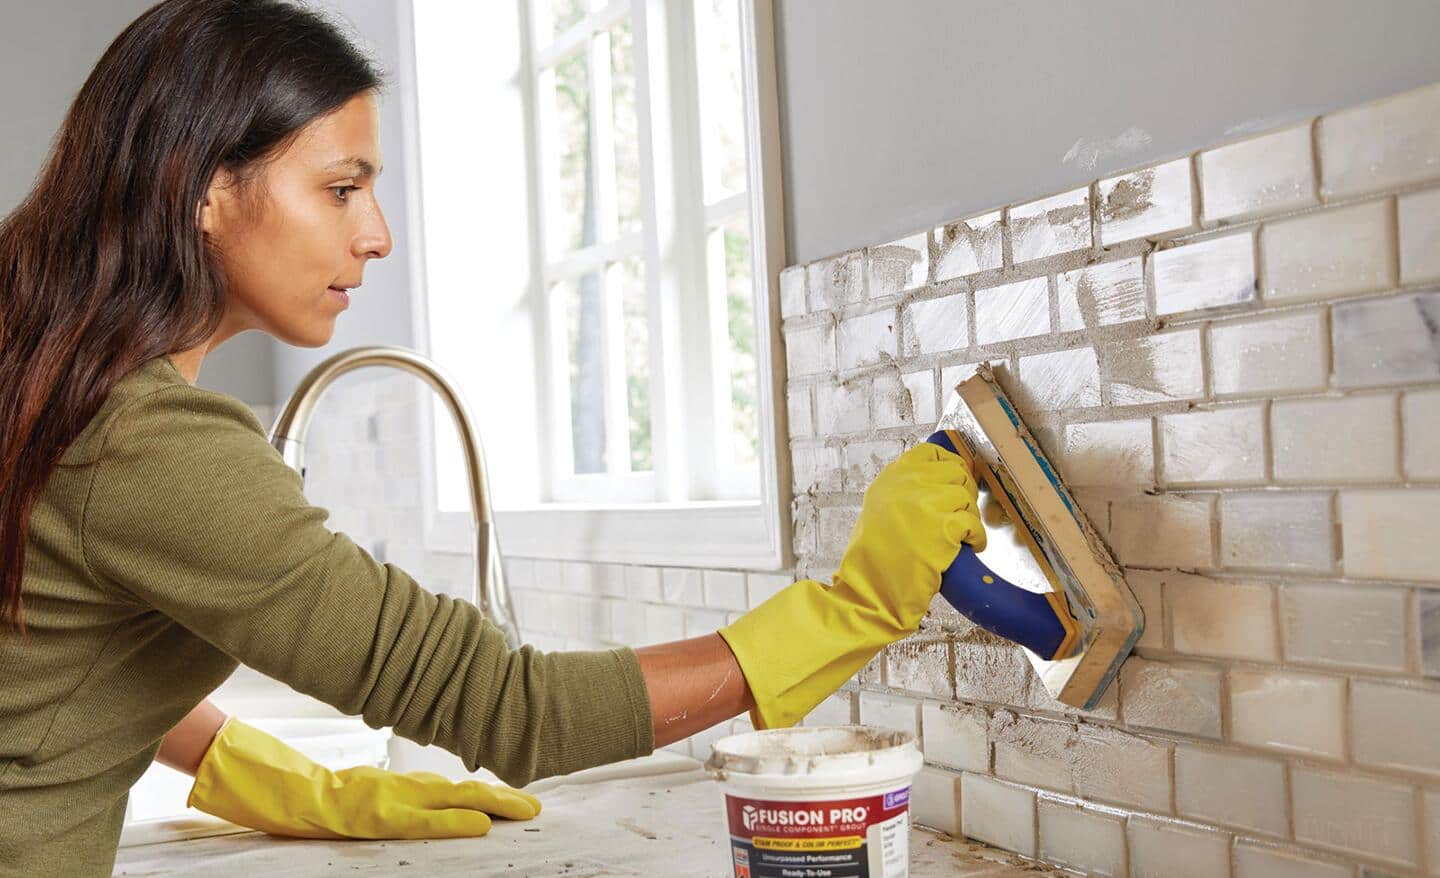 A person applies grout to tile.